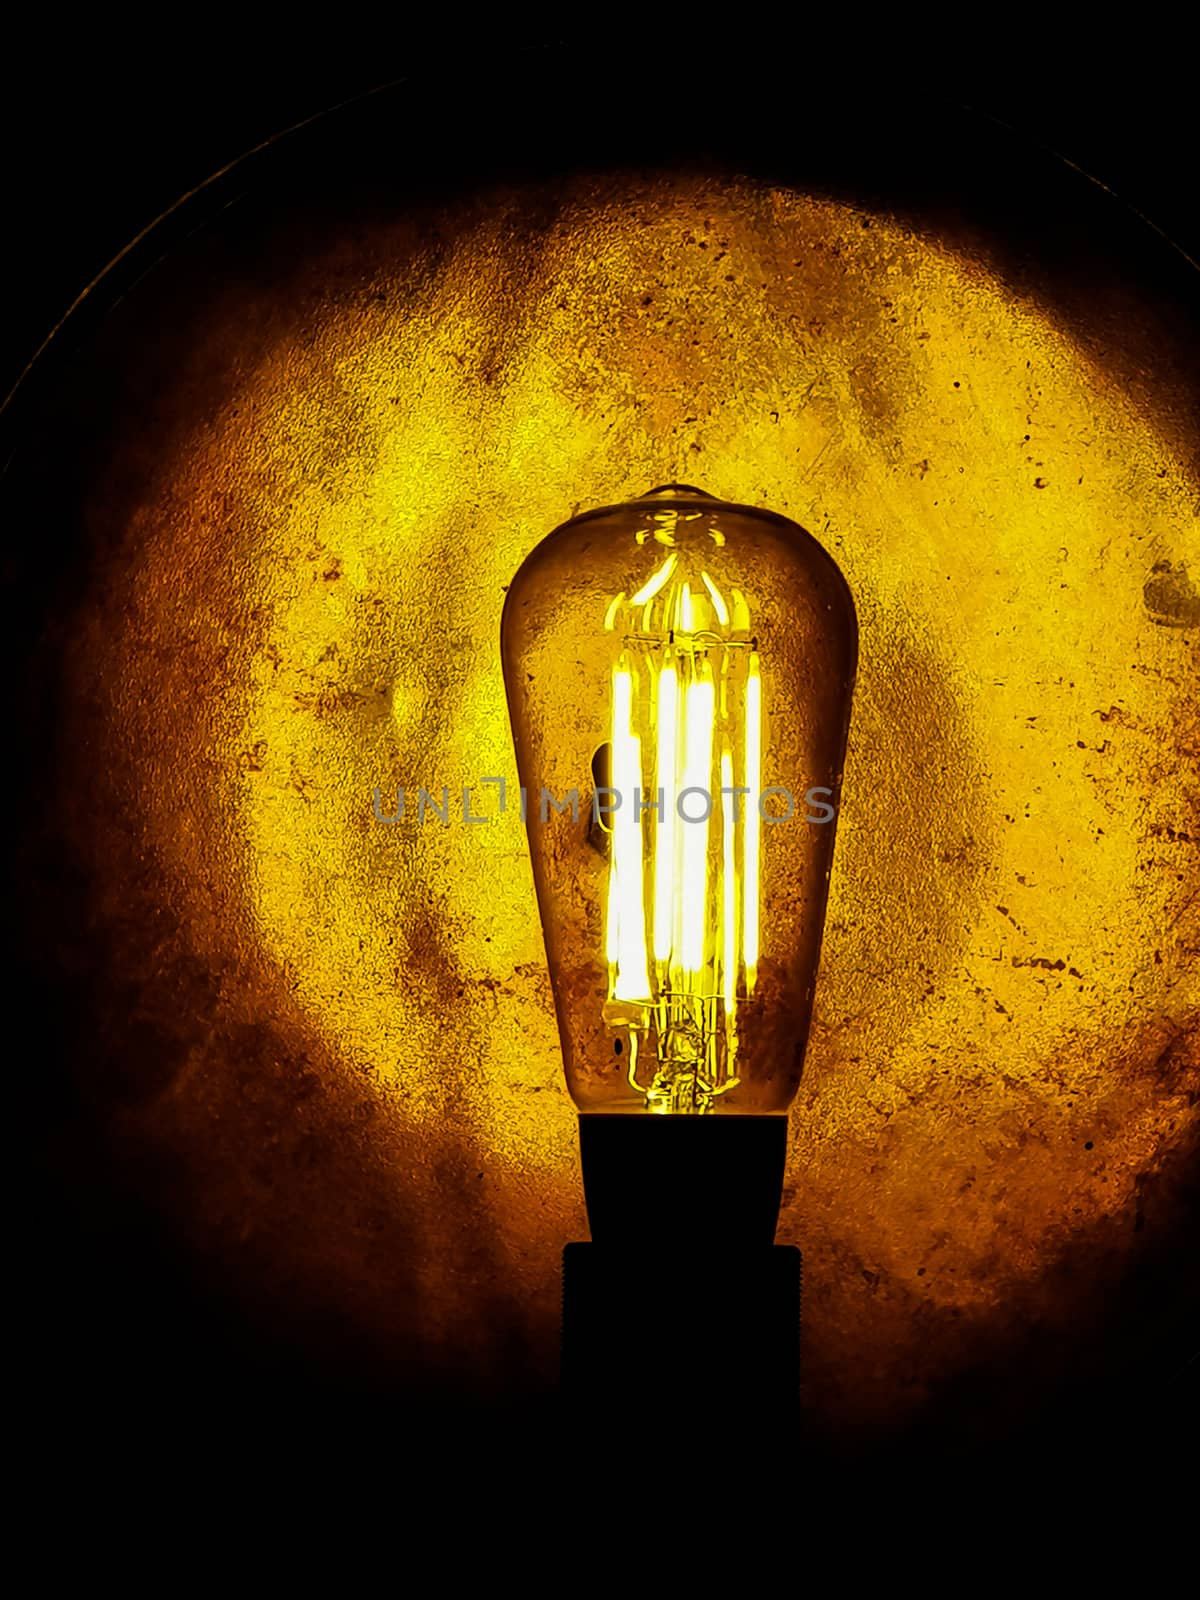 Retro style decorative light bulbs with golden background